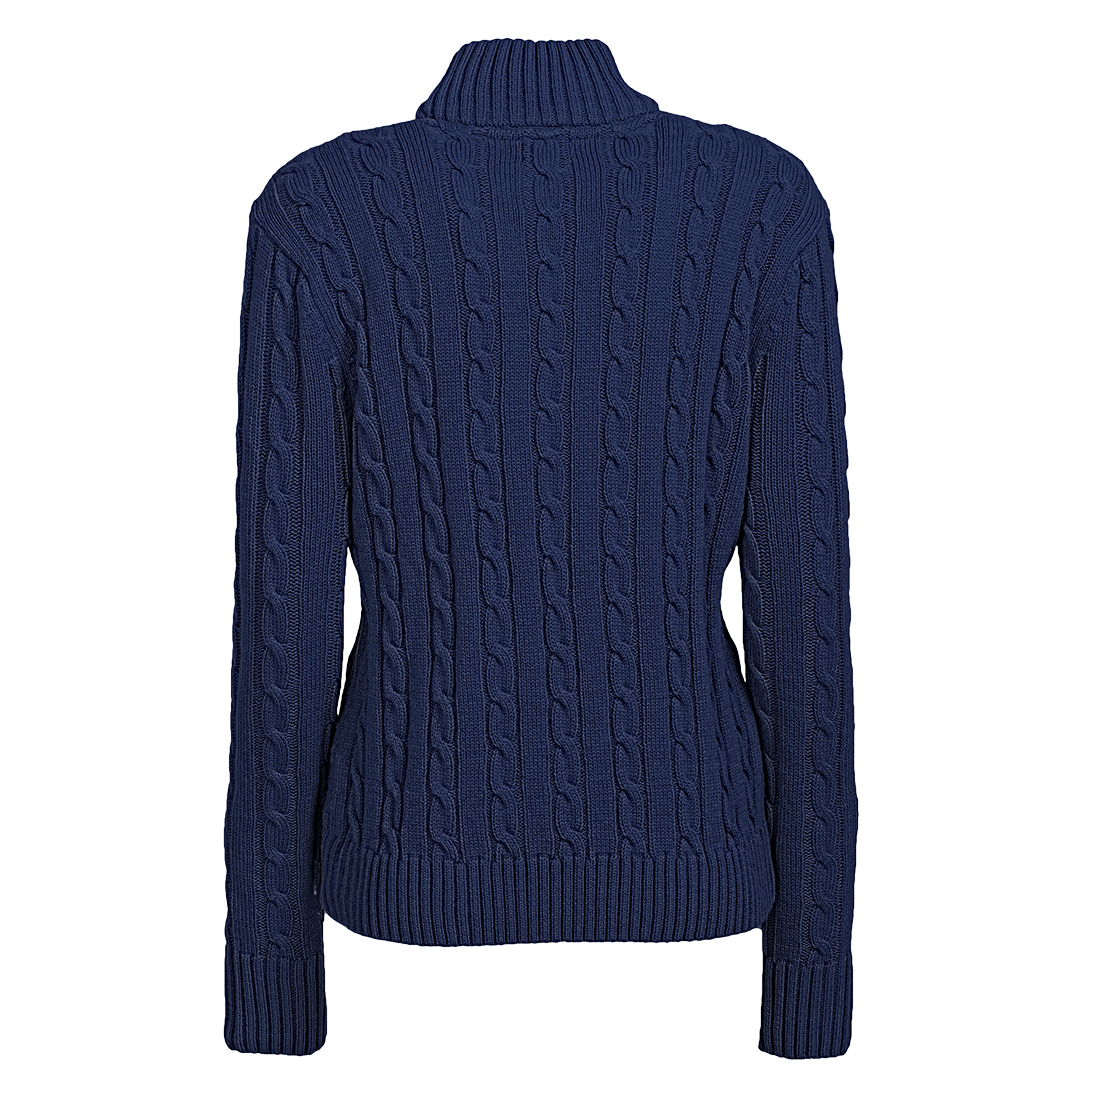 Jonsson Workwear | Women's Cable Knit Button Up Jersey